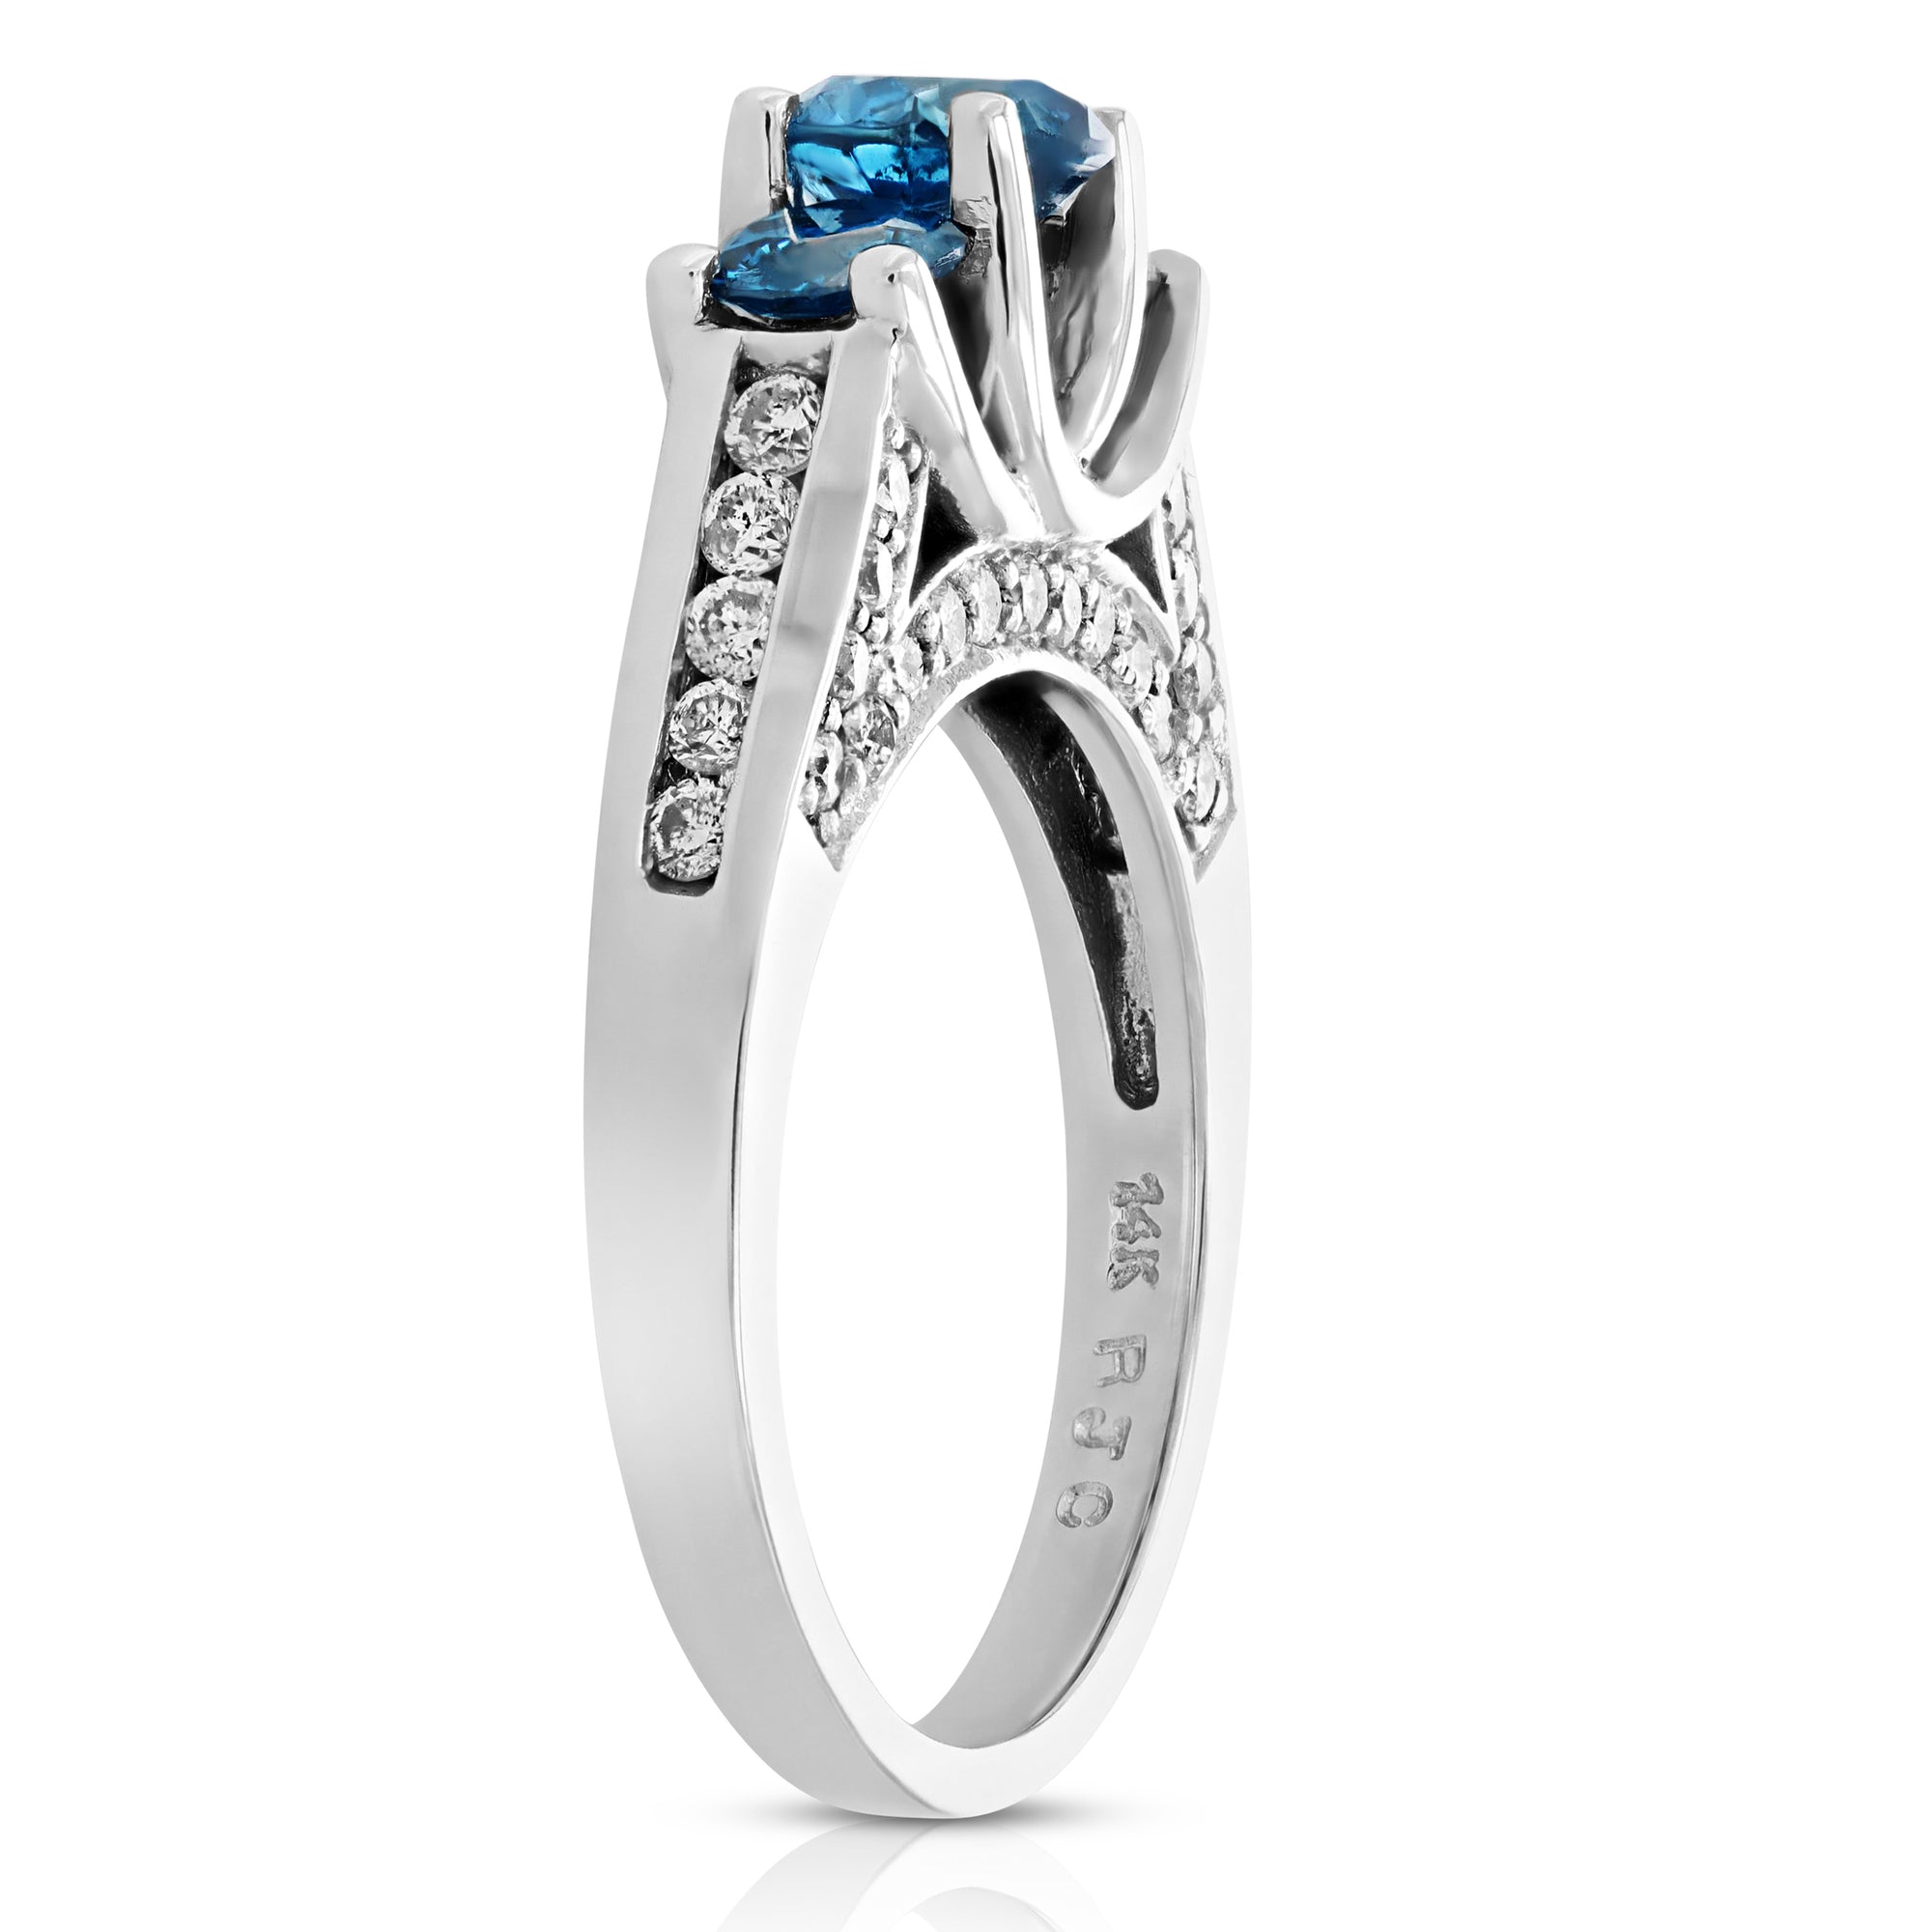 2.56 cttw Blue and White Diamond 3 Stone Ring 14K White Gold Engagement Size 7